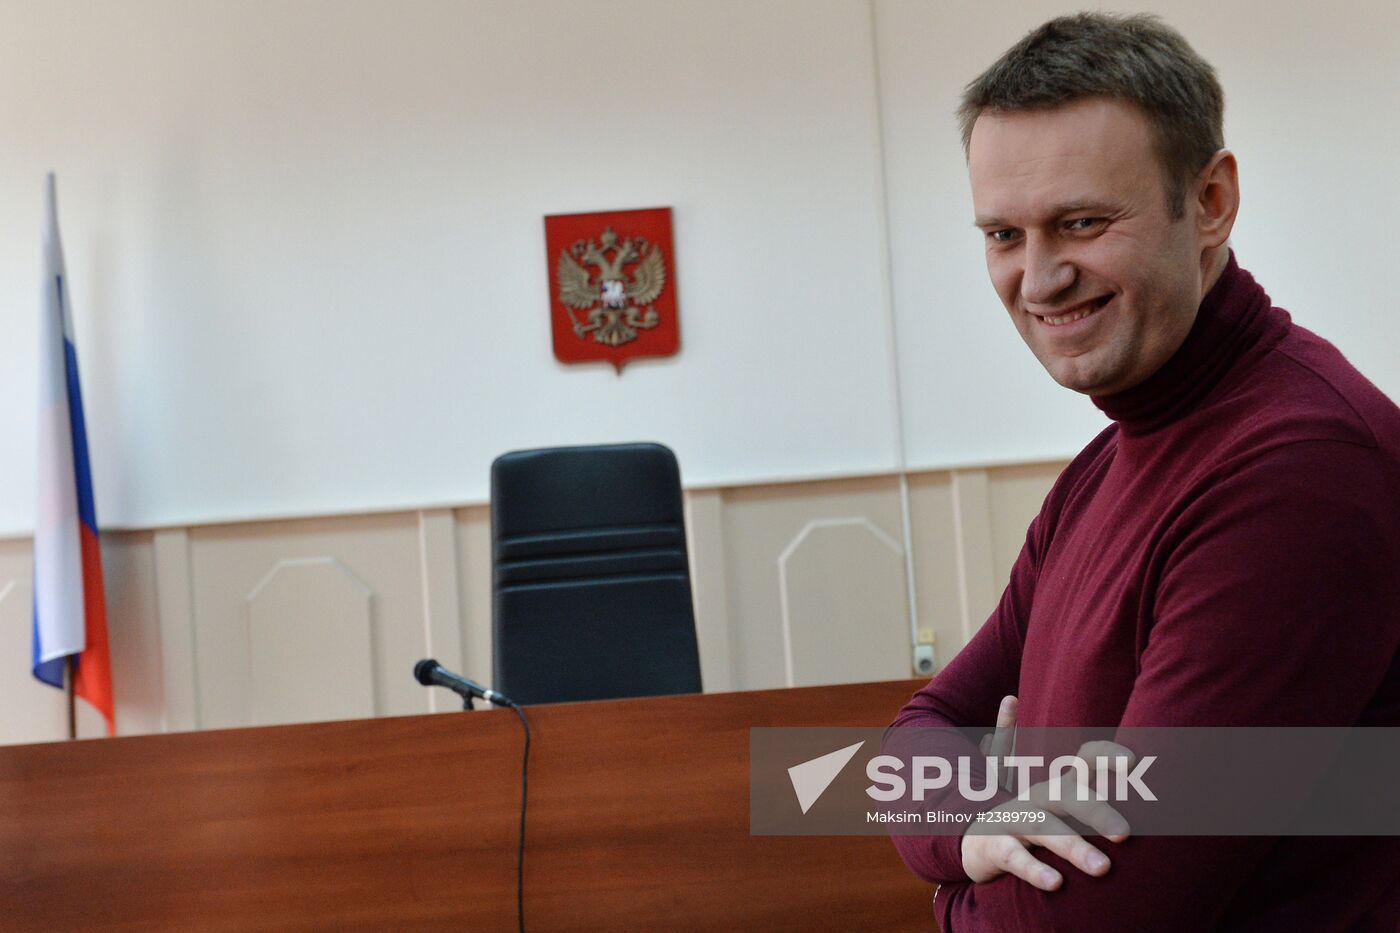 Court considers request for Alexei Navalny's house arrest